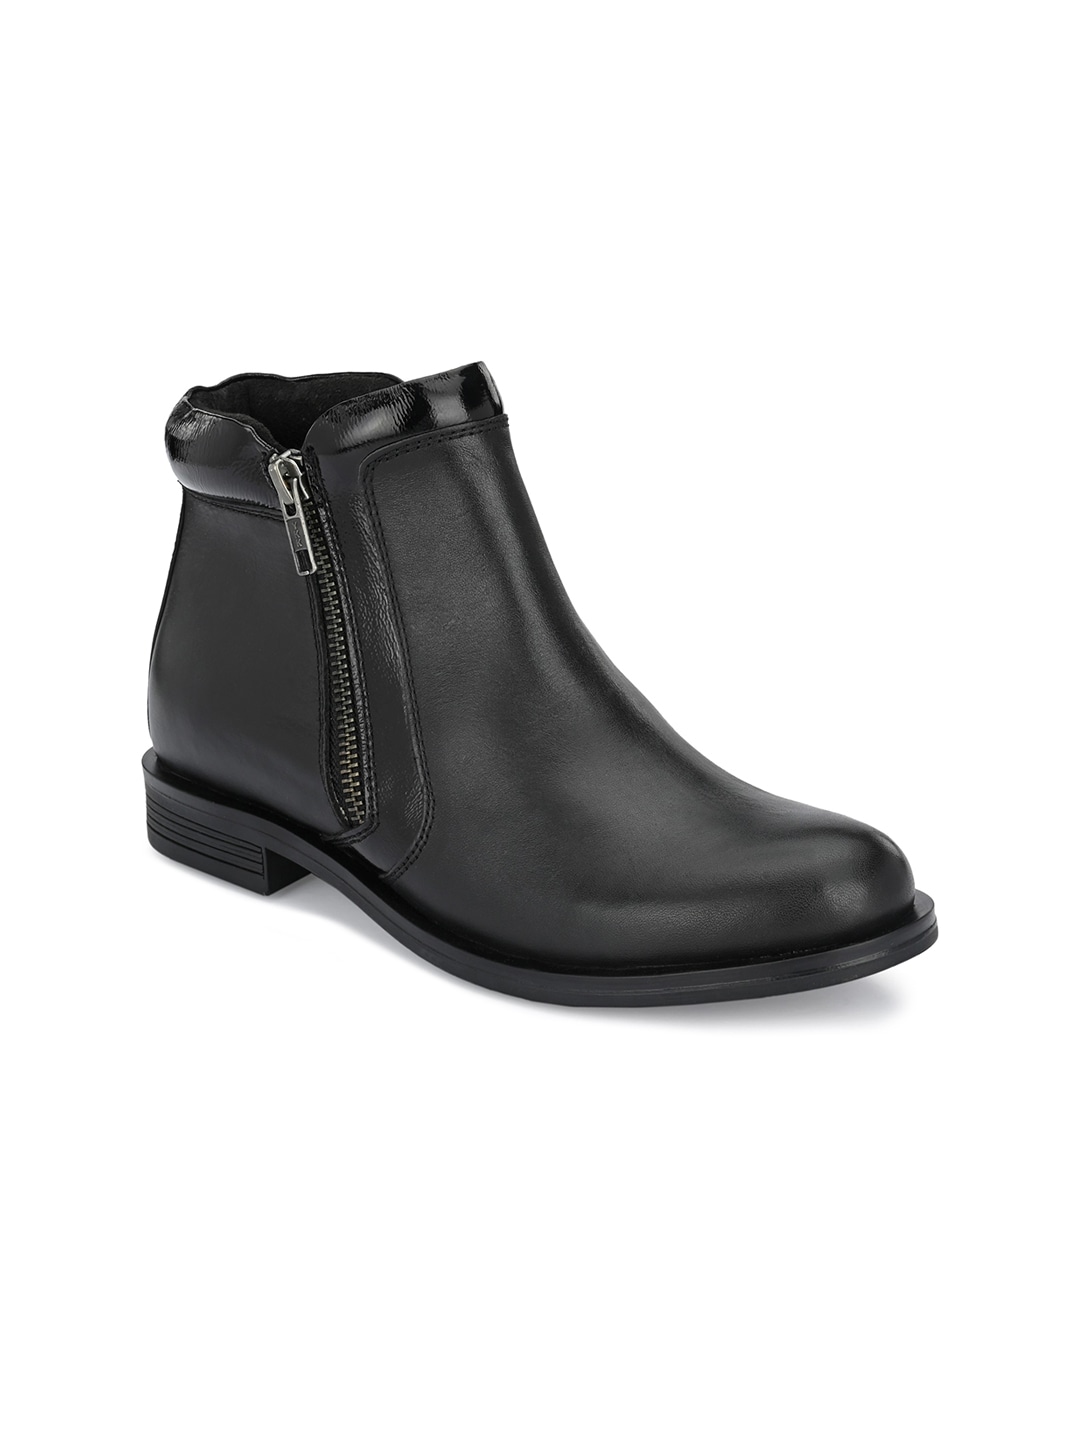 Delize Black Leather Block Heeled Boots Price in India